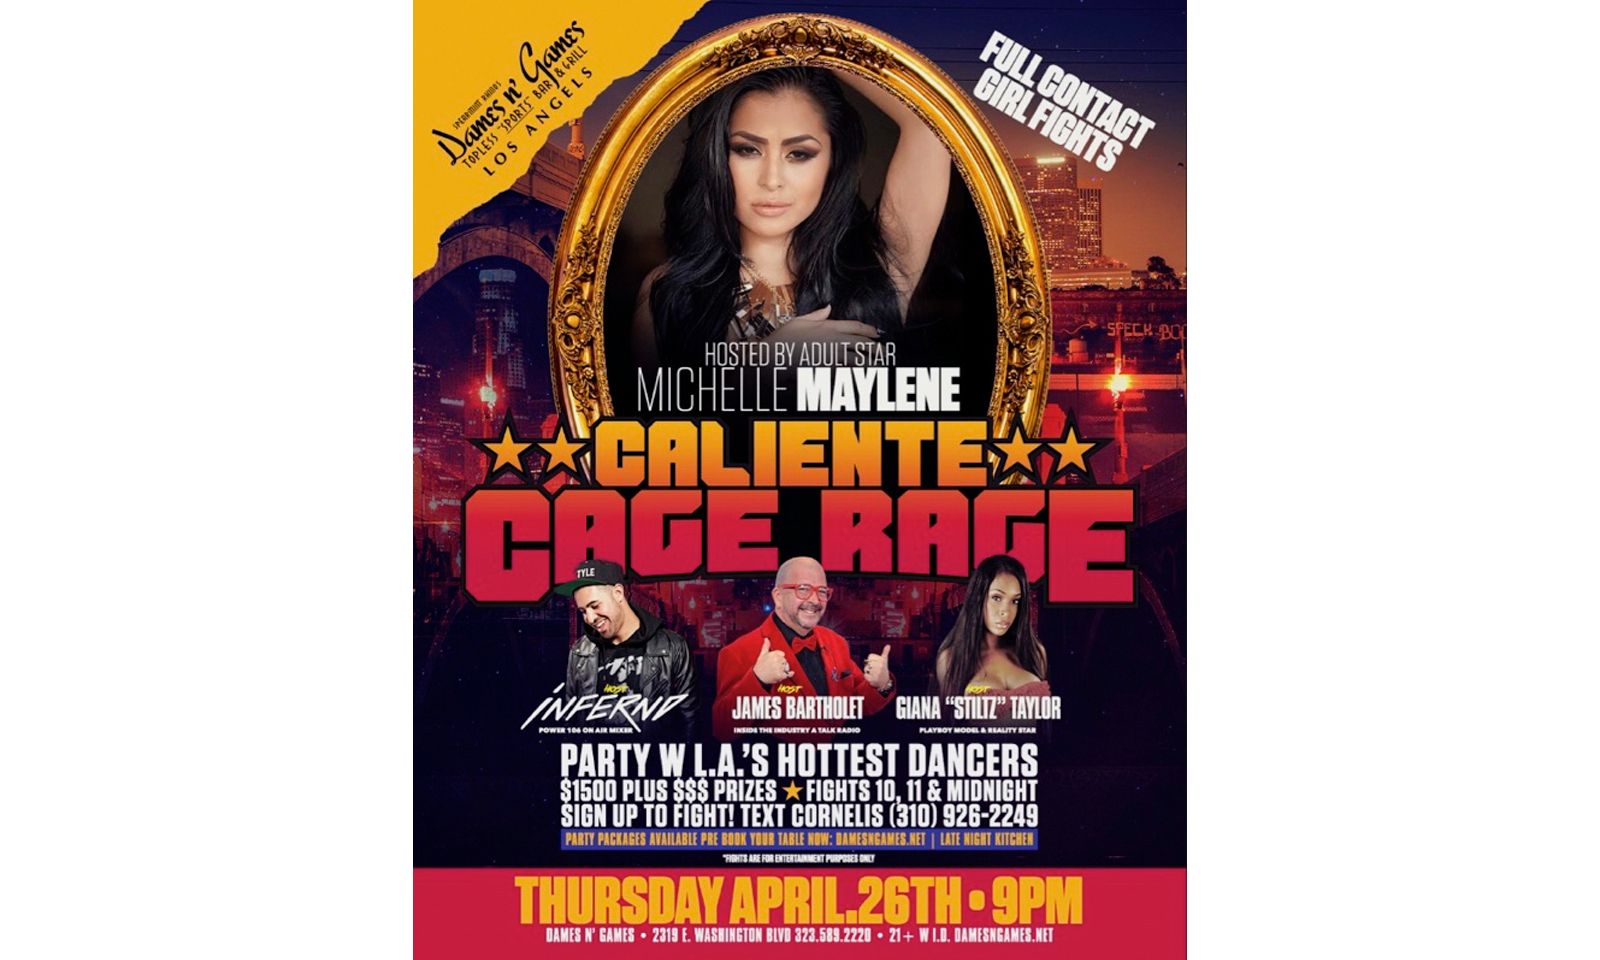 Michelle Maylene at Caliente Cage Rage at Dames N Games Downtown